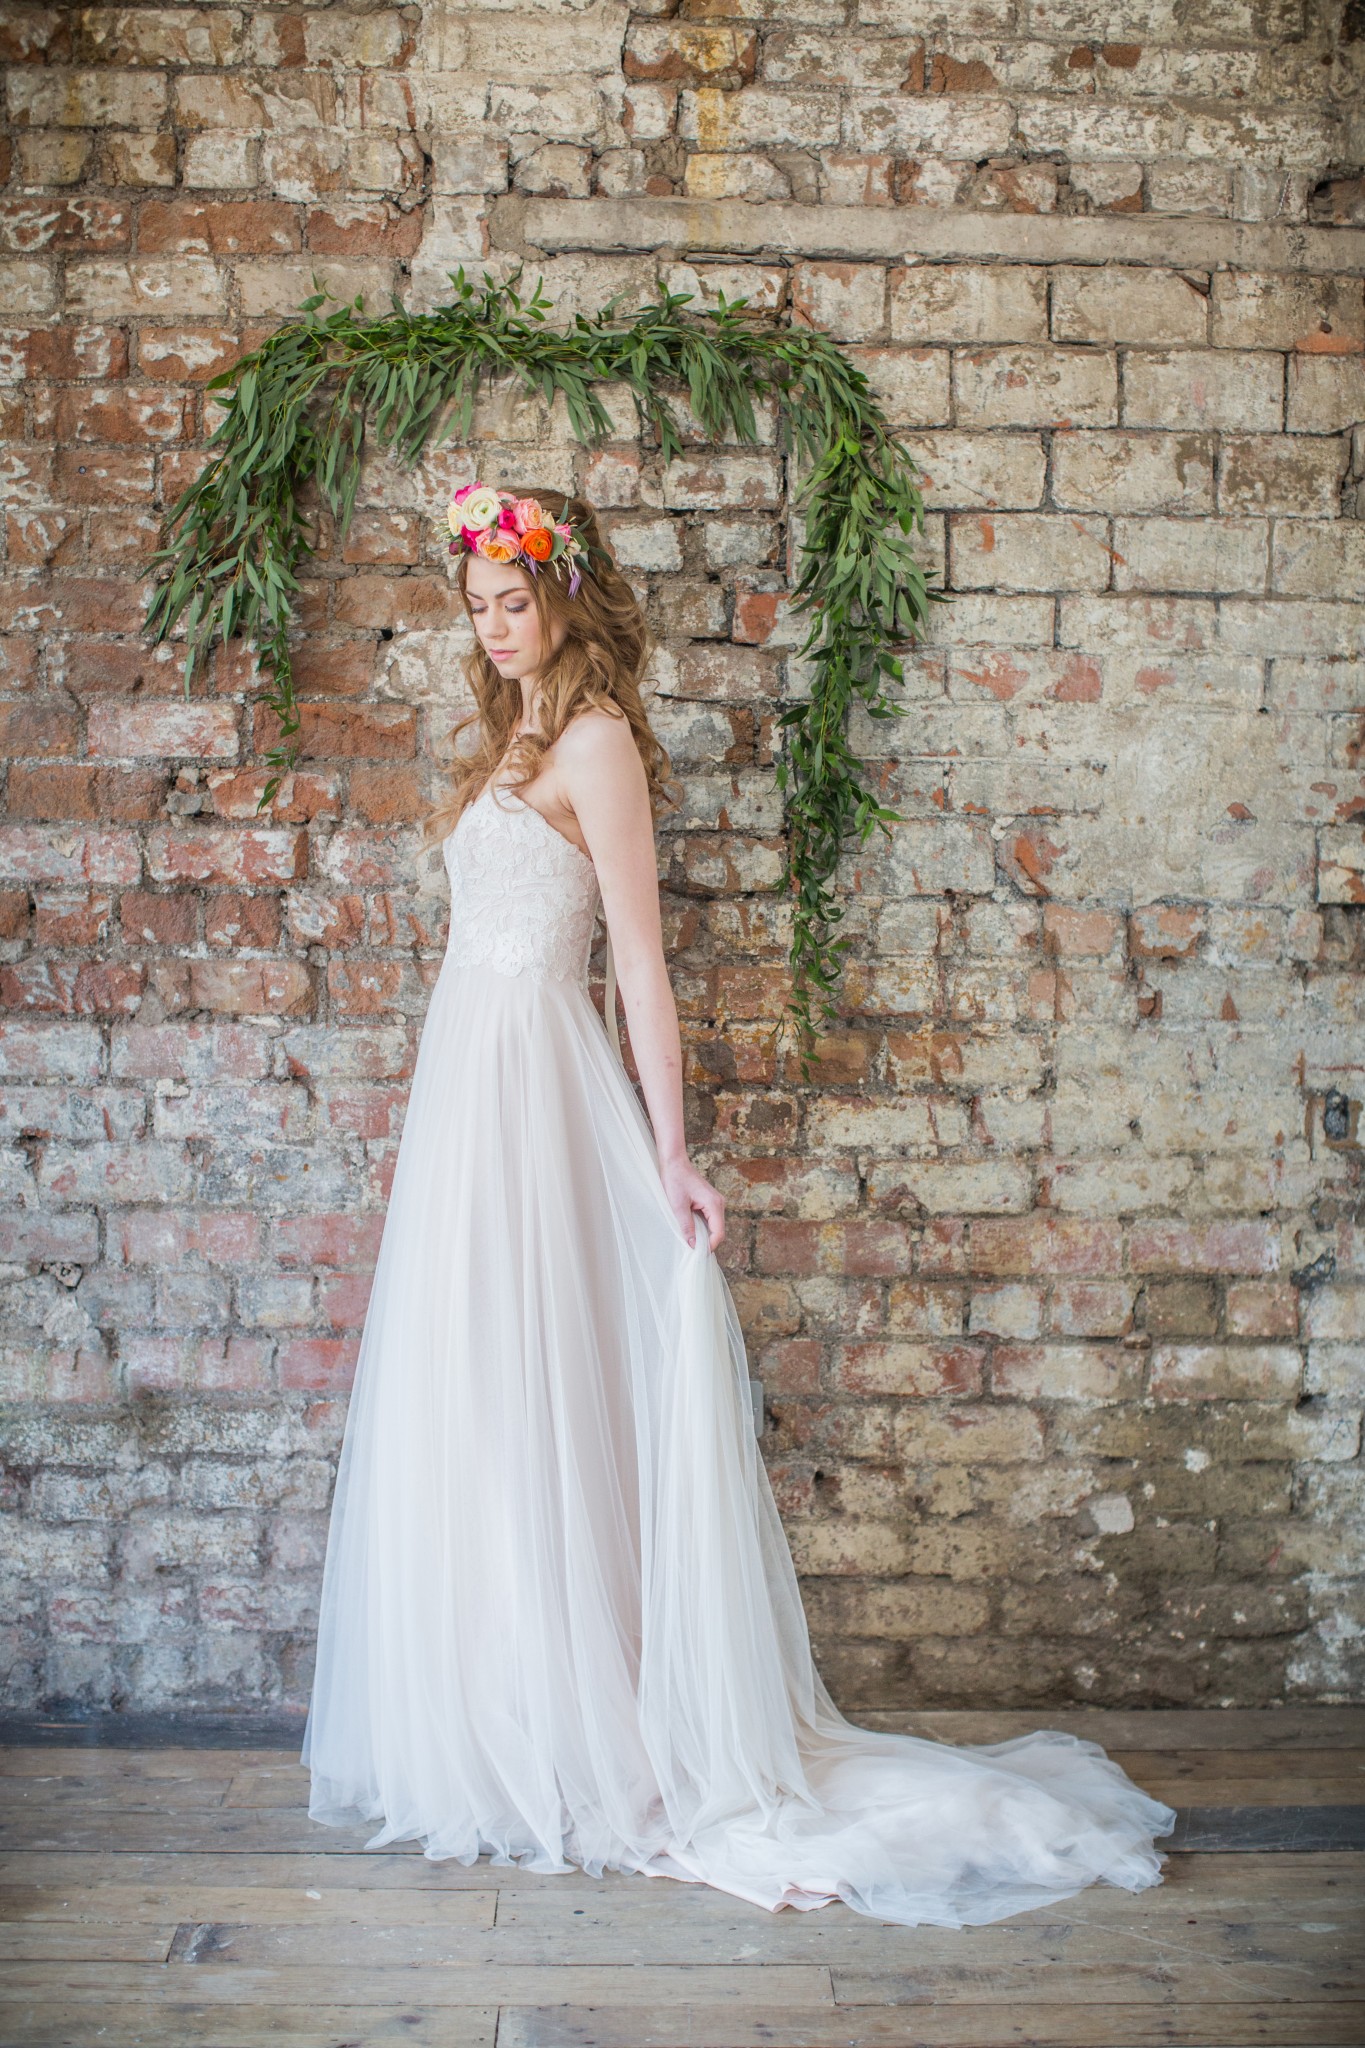 evoke-pictures_the-forge-bristol_wedding-ideas-shoot_109